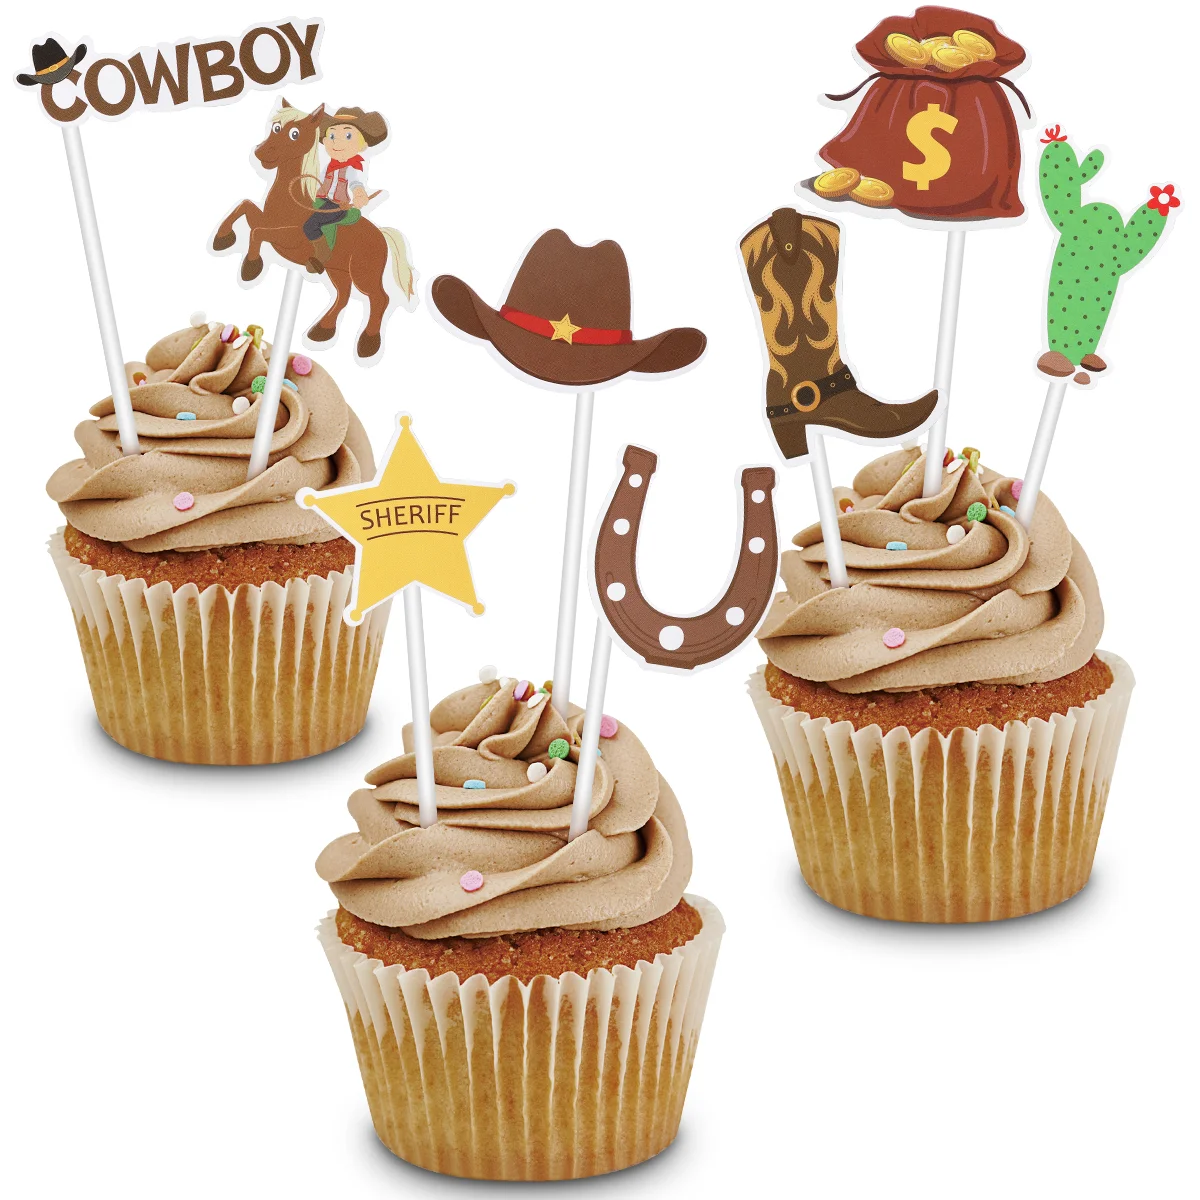 

72PCS Cowboy Cupcake Toppers Western Theme Party Cowboy Birthday Cupcake Toppers Cake Decoration for Cowboy Birthdays, Cowgirl